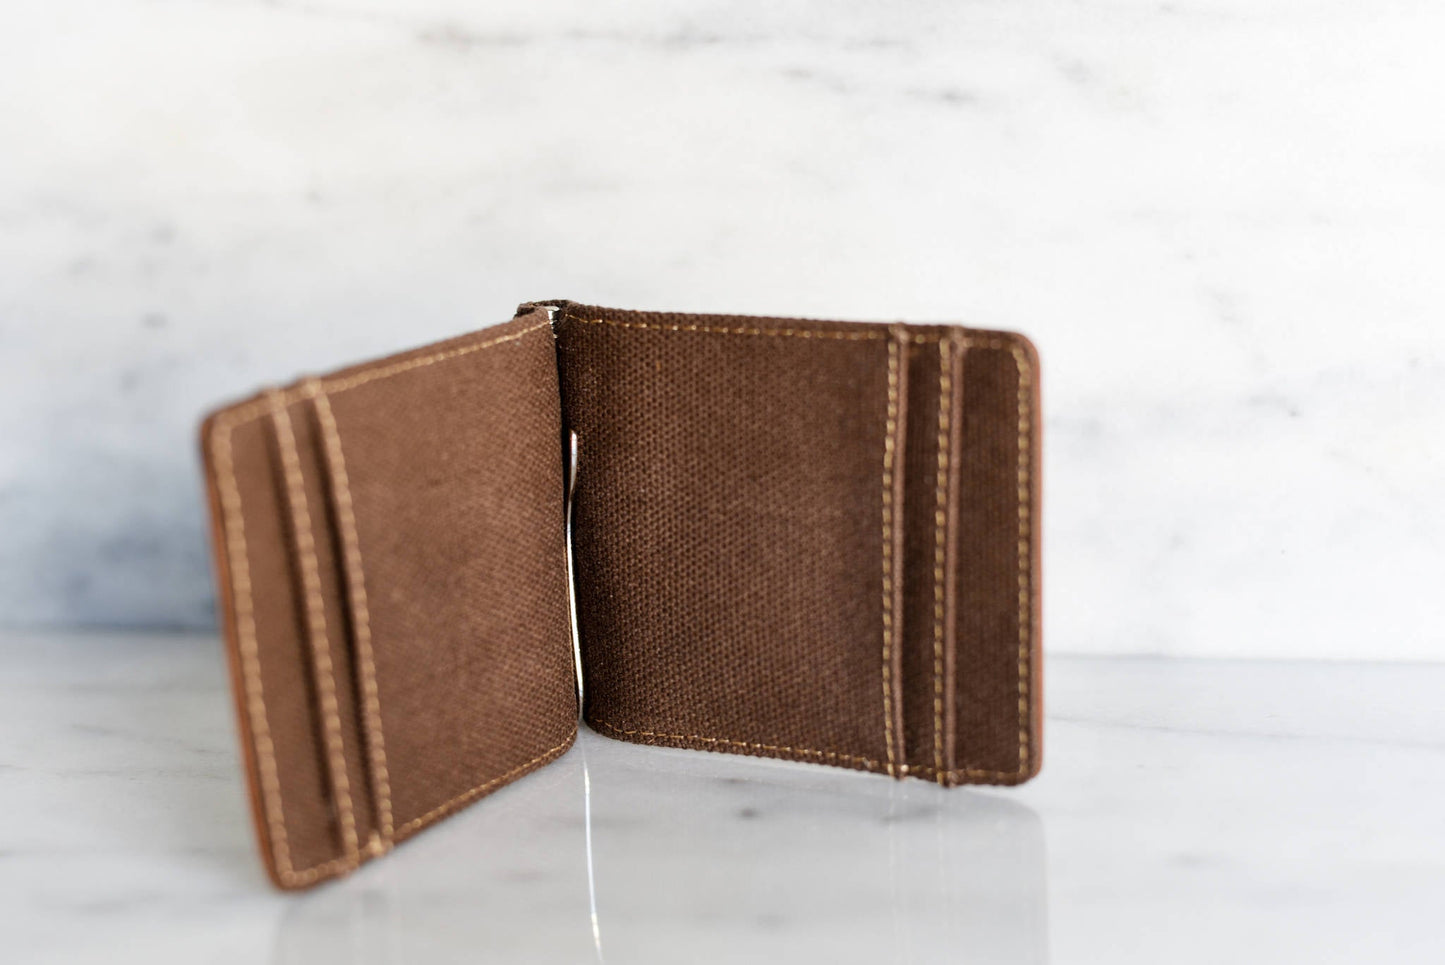 The Desoto Personalized Leather Slim Wallet